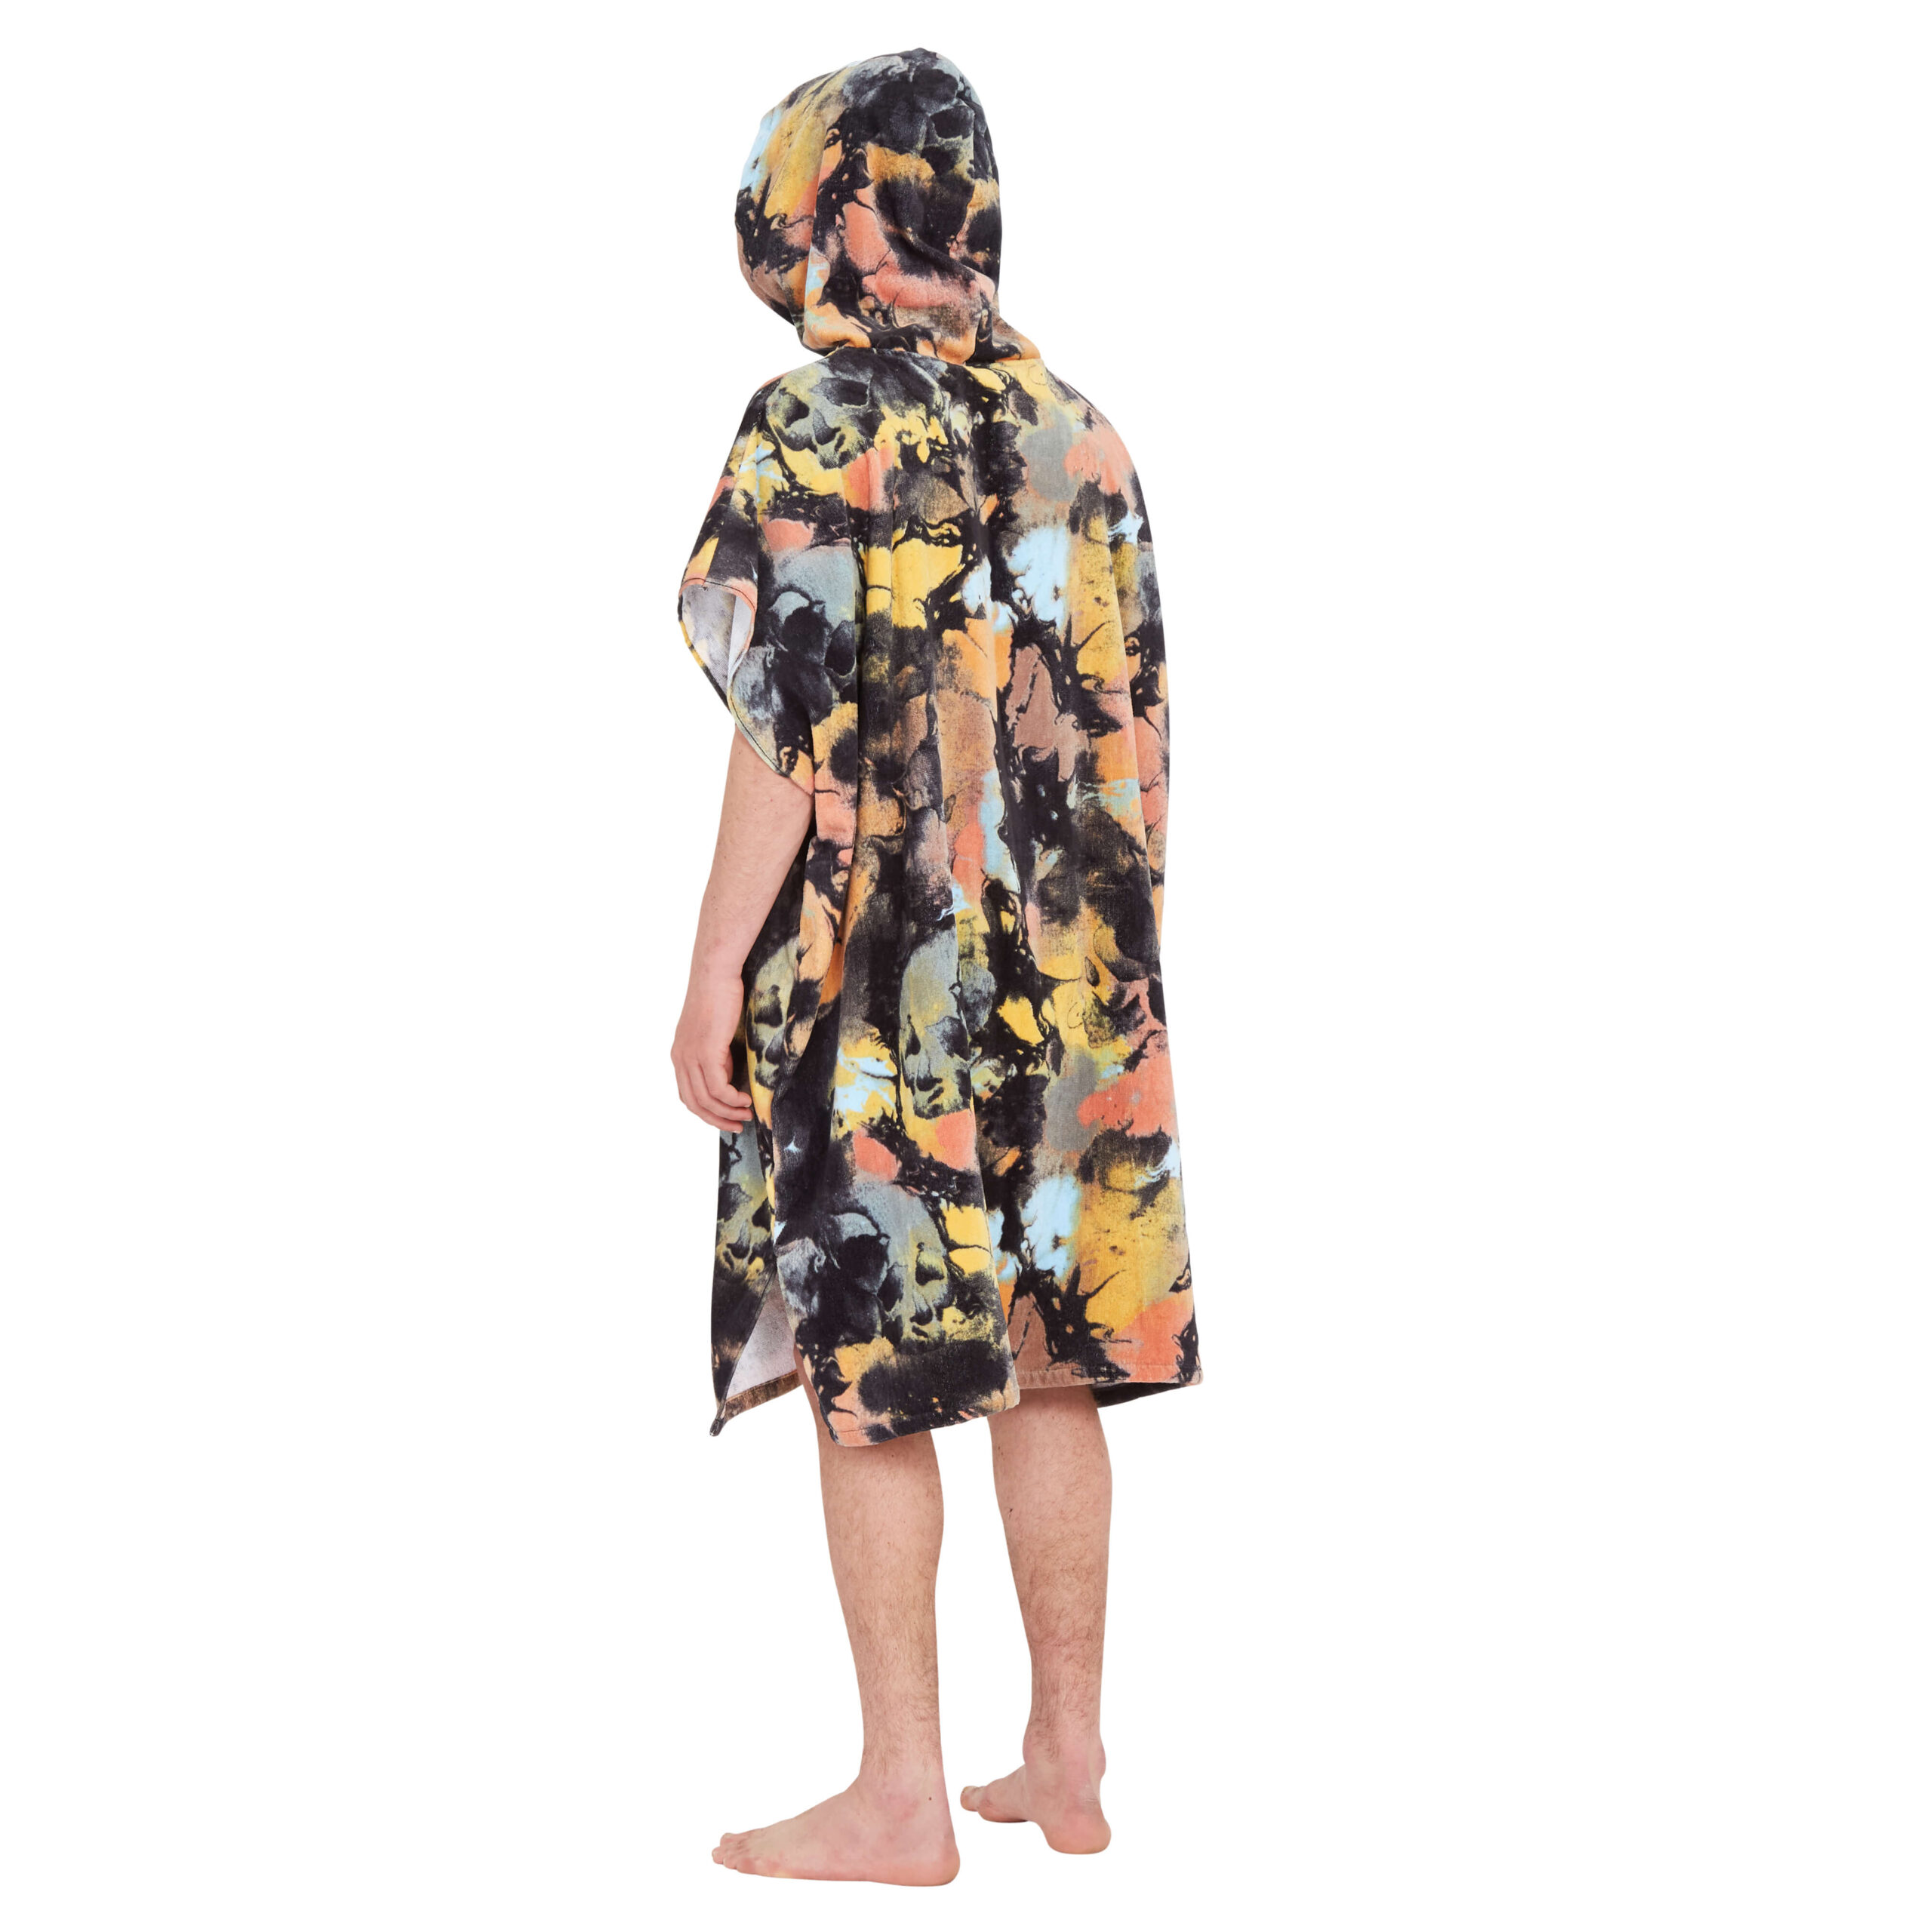 Poncho Volcom - ROOK CHANGING TOWEL - Dawn Yellow -D6712203 (2)